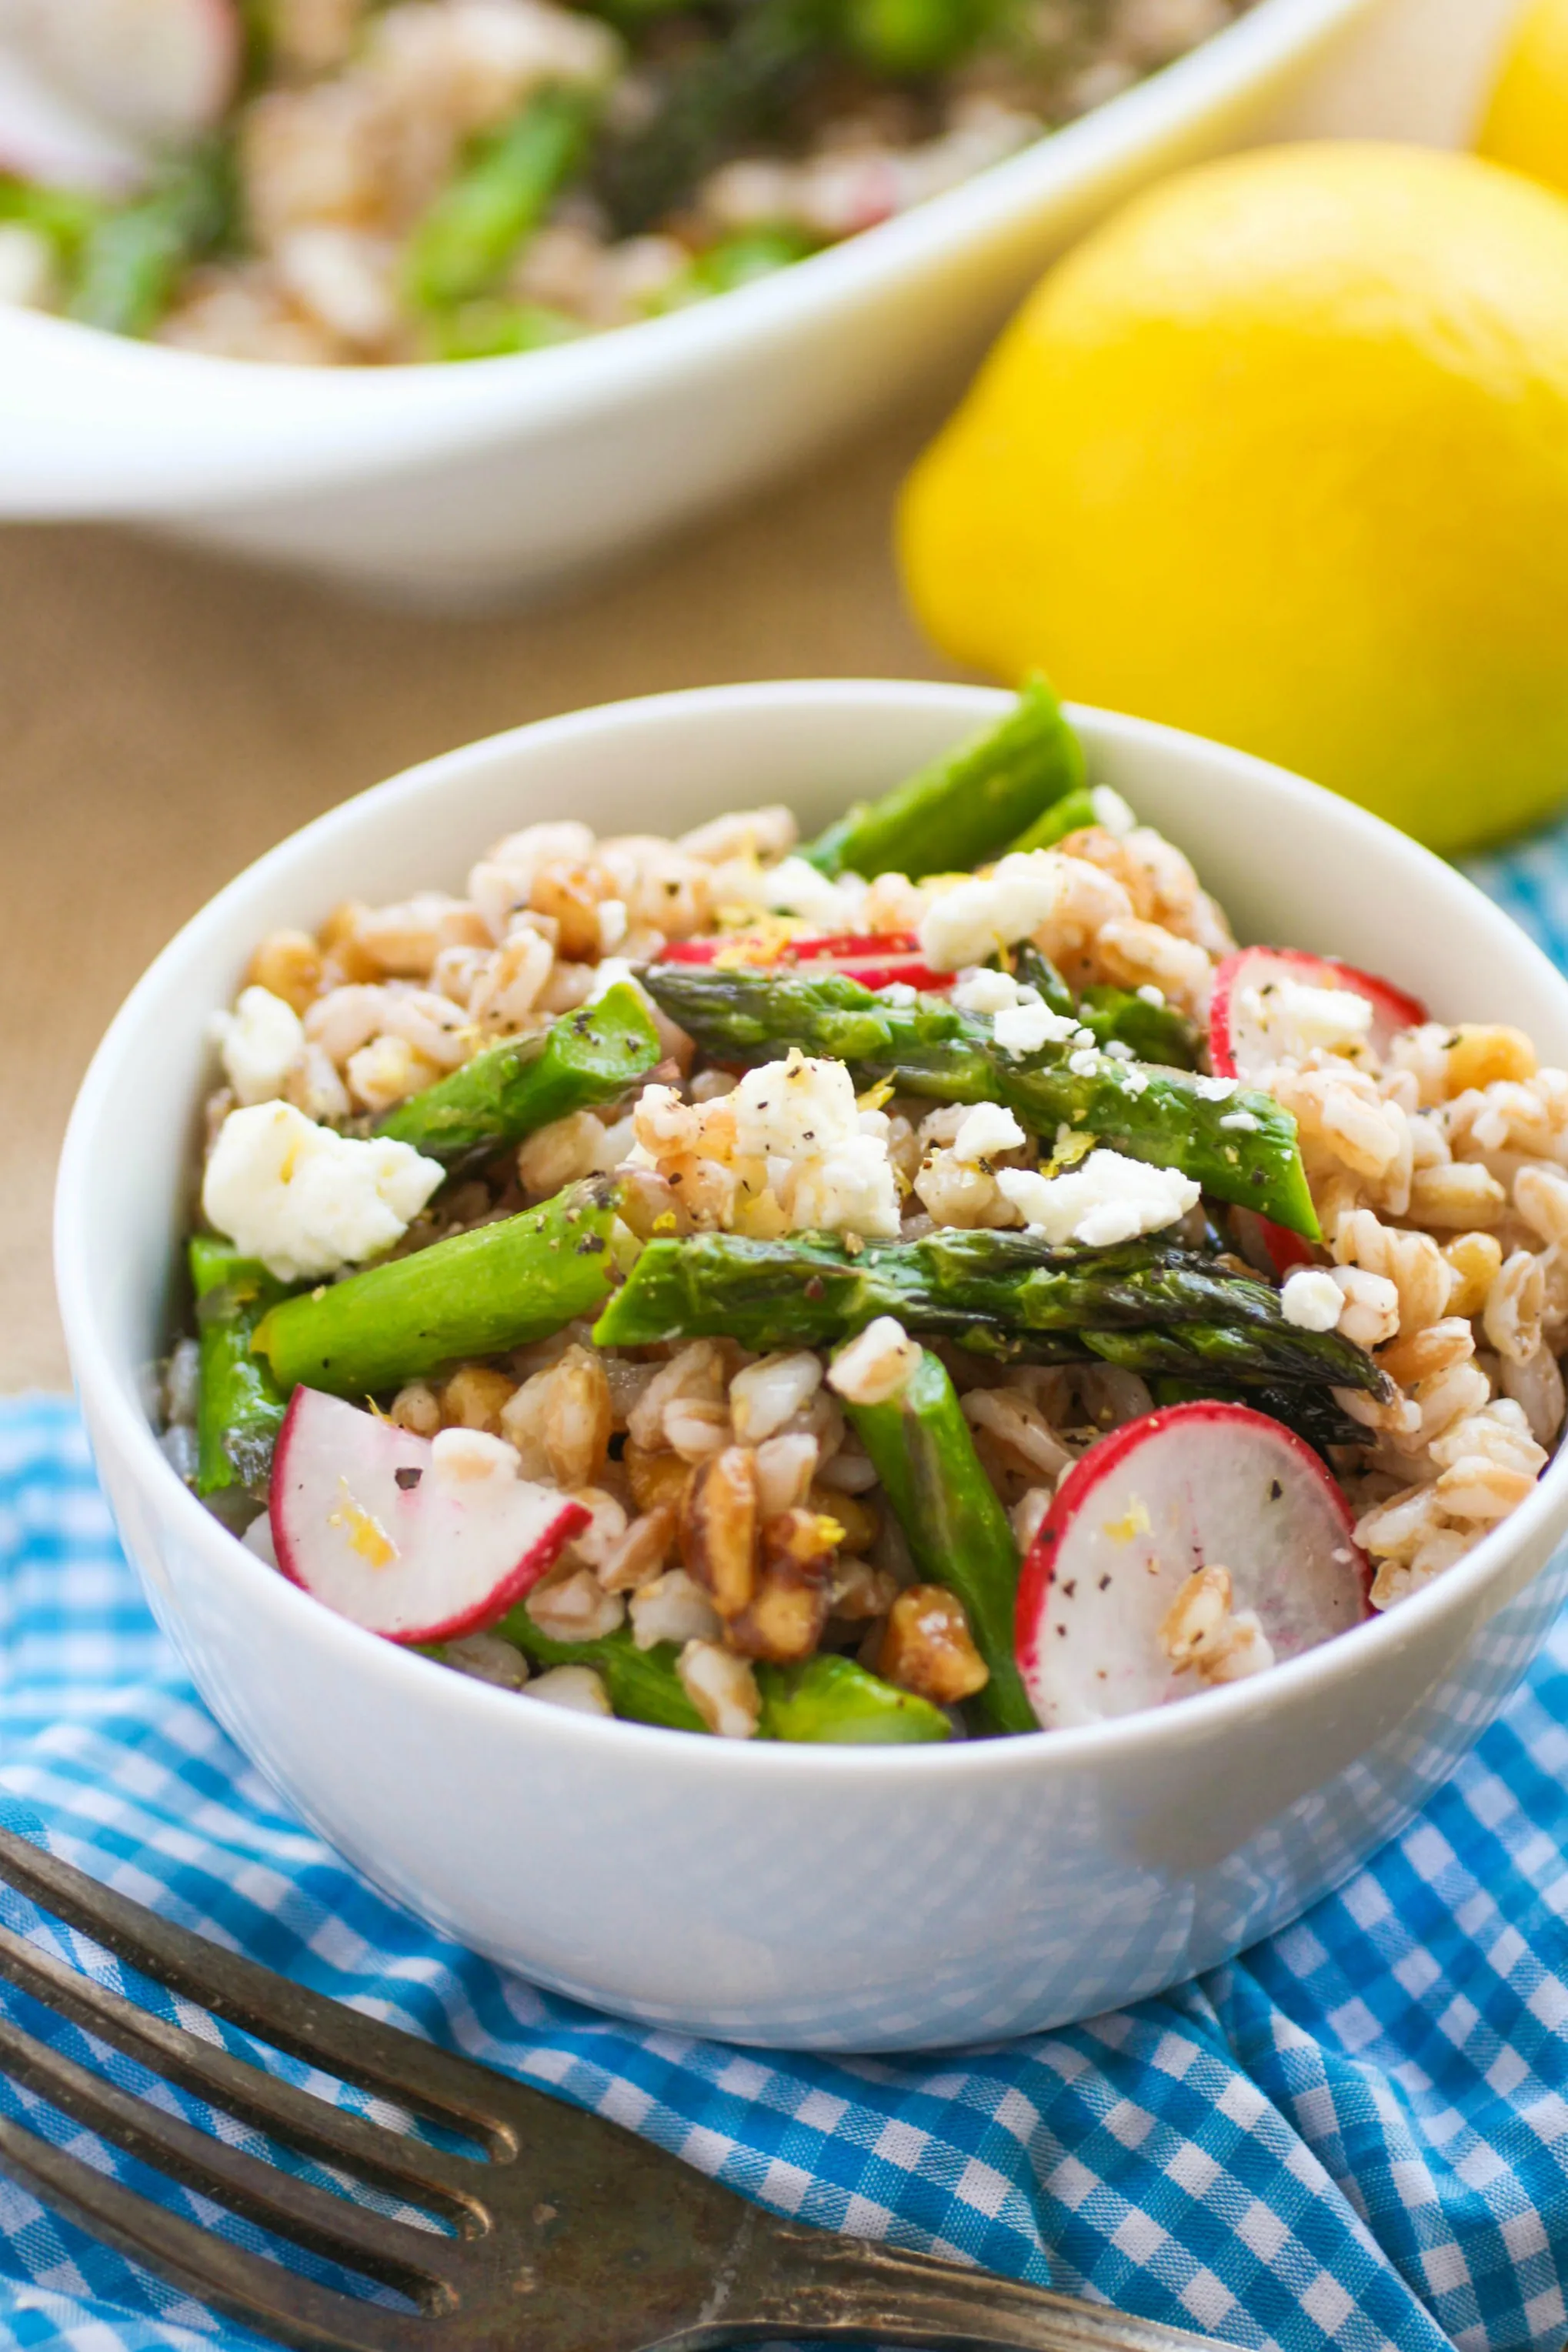 Farro Salad with Asparagus, Radishes & Lemon Vinaigrette is a fabulous spring dish! You'll love the bright colors and flavors!